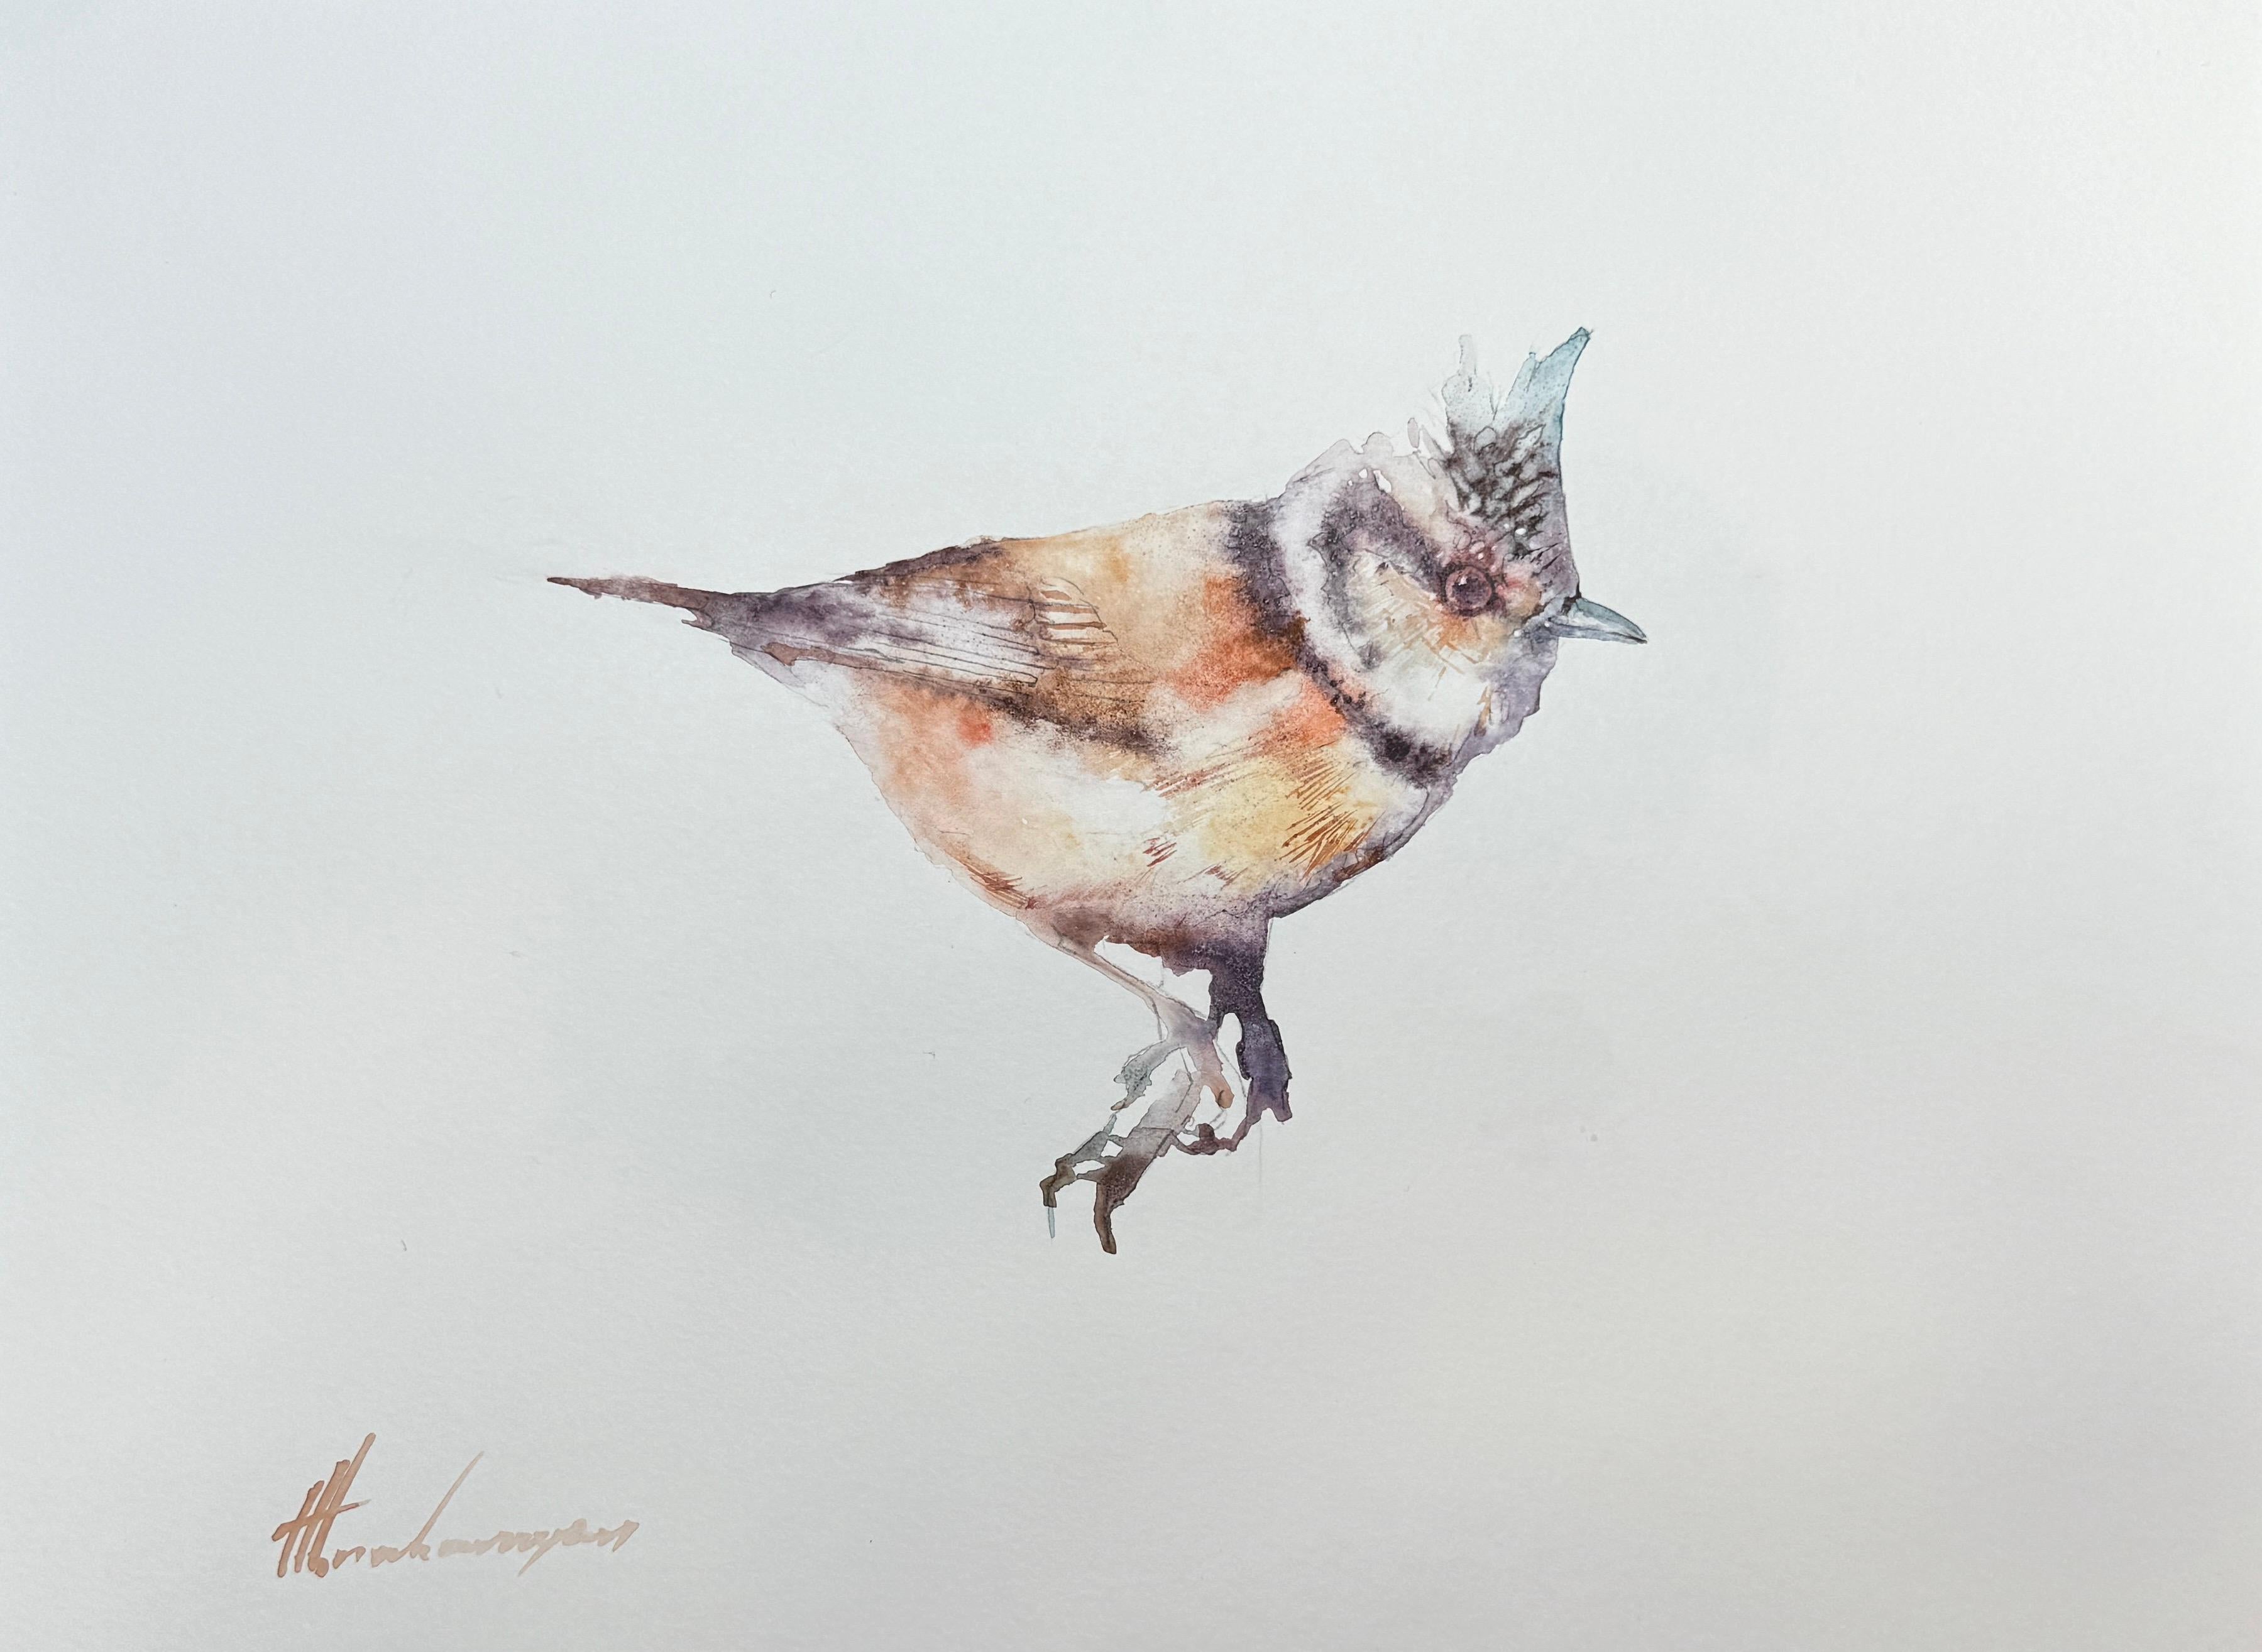 Artyom Abrahamyan Animal Art - Tufted Titmouse, Bird, Watercolor on Paper, Handmade Painting, One of a Kind